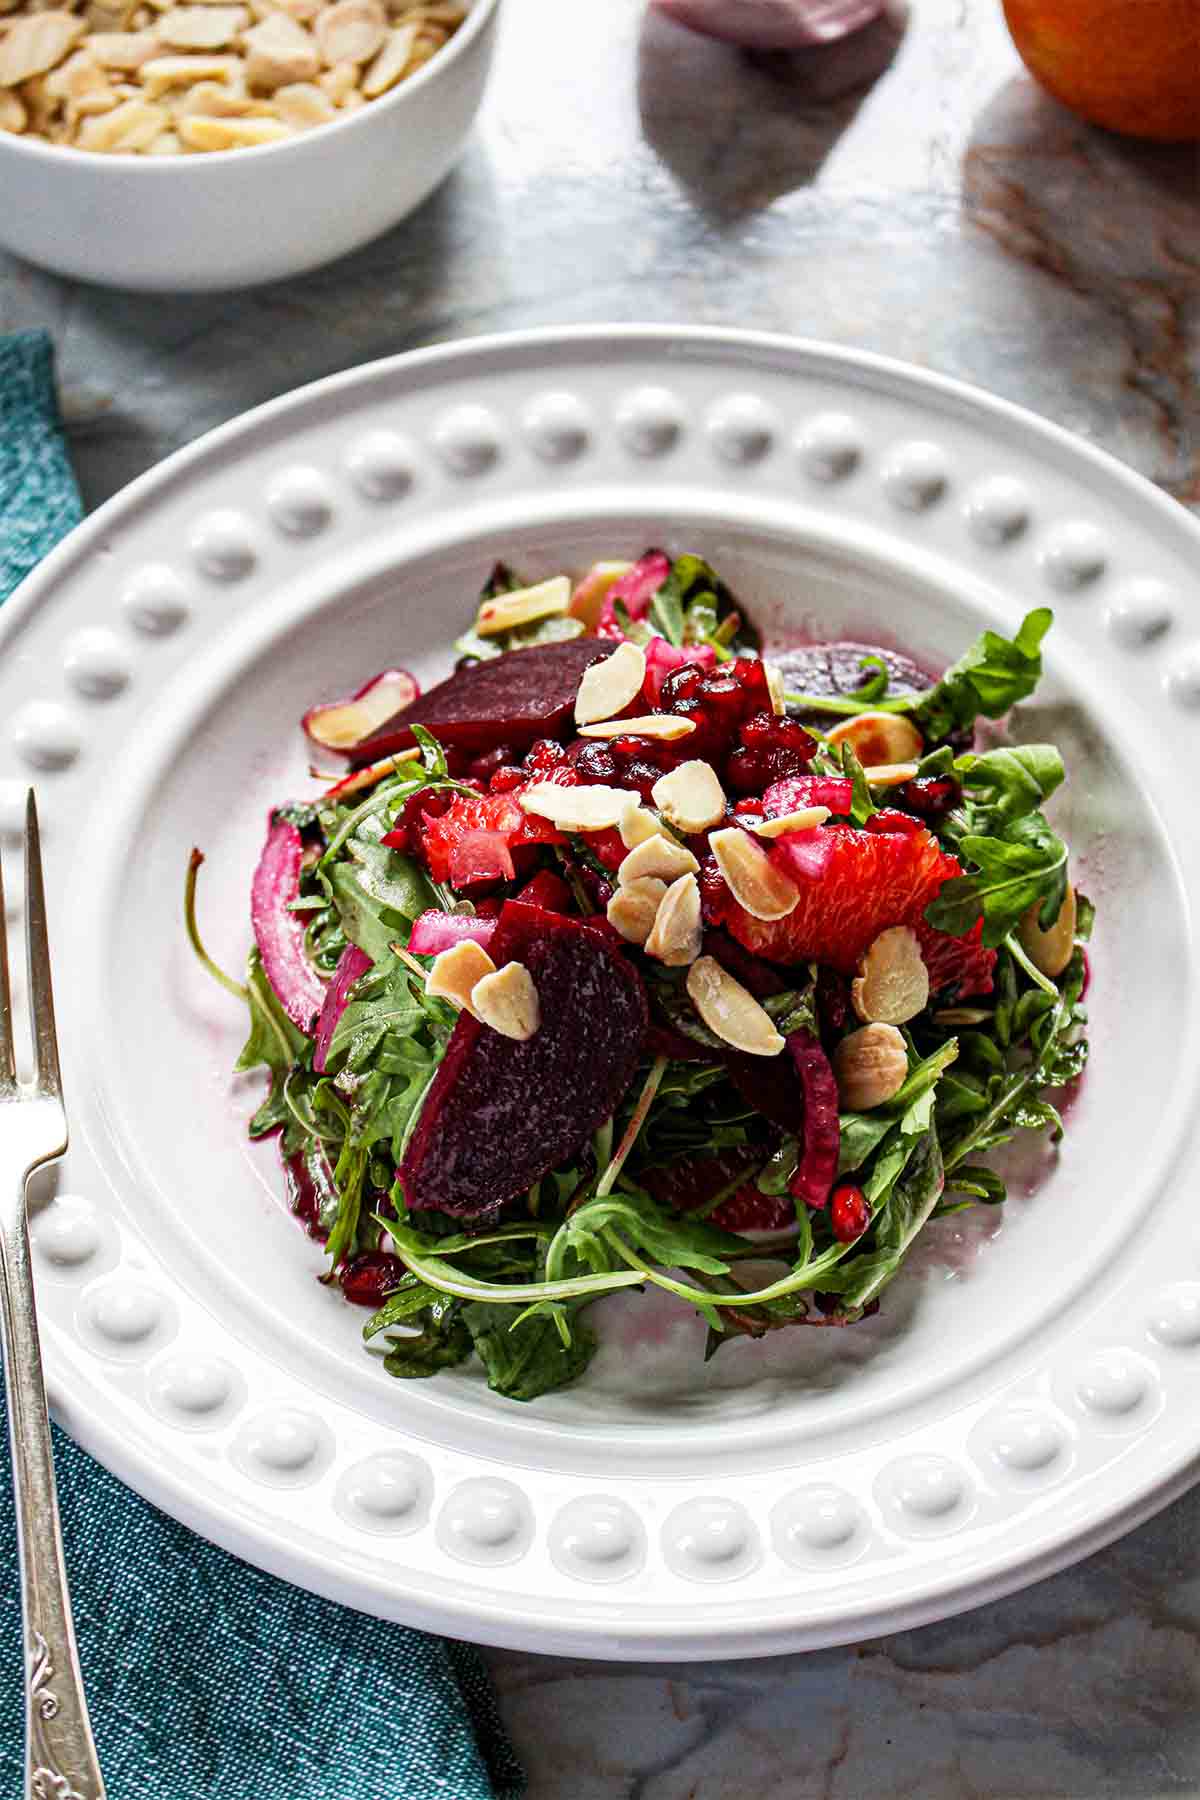 Roasted Beet Salad with Blood Oranges (For The Holiday Table!)